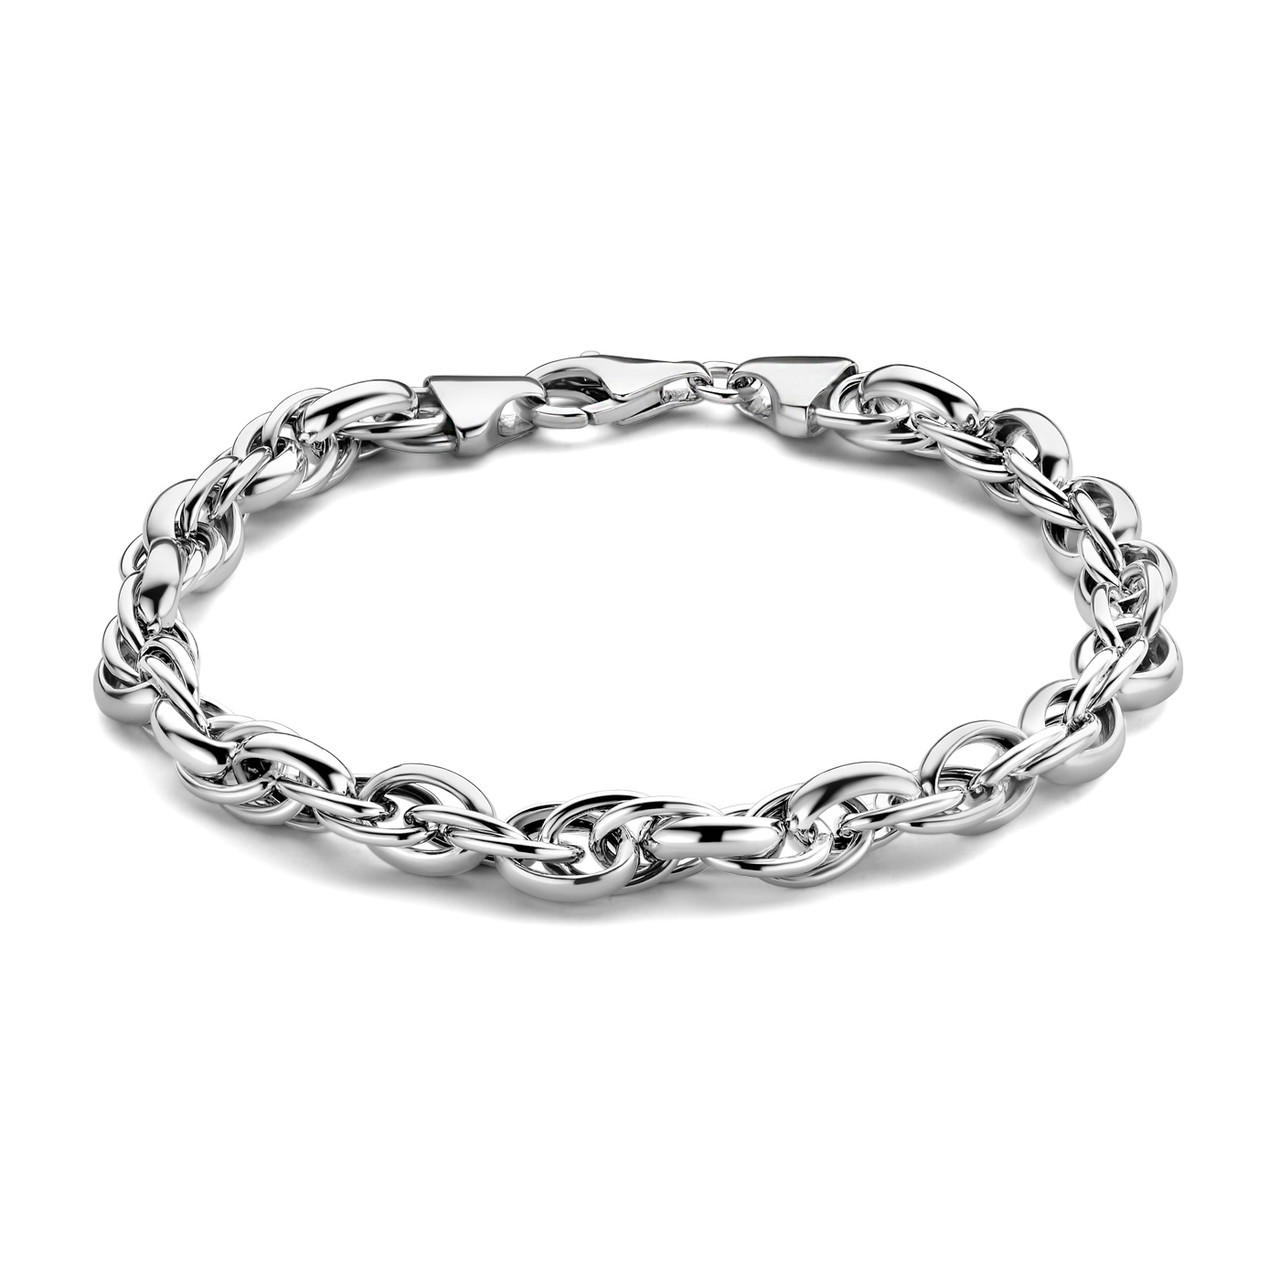 Parte Di Me 925 Link Armband Silber PDM32011 Sterling 